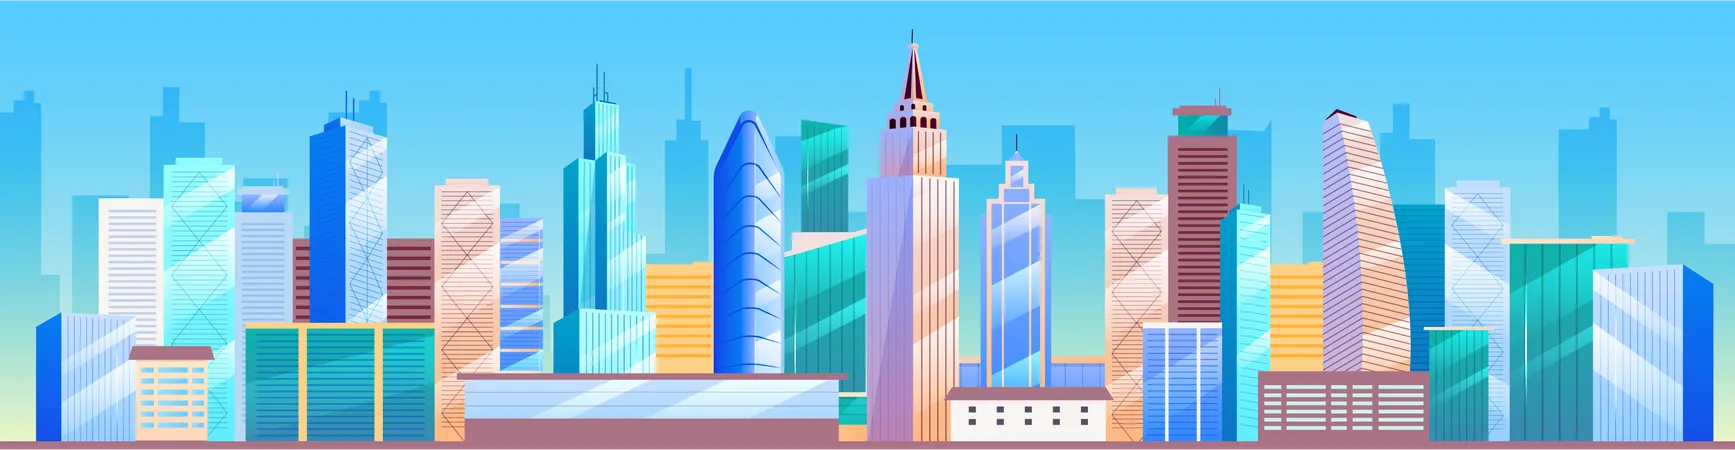 Urban Landscape Flat Color Vector Illustration City Skyline Metropolis 2 D Cartoon Cityscape With Skyscrapers On Background Business District Architecture Downtown Panorama With Tall Buildings Illustration